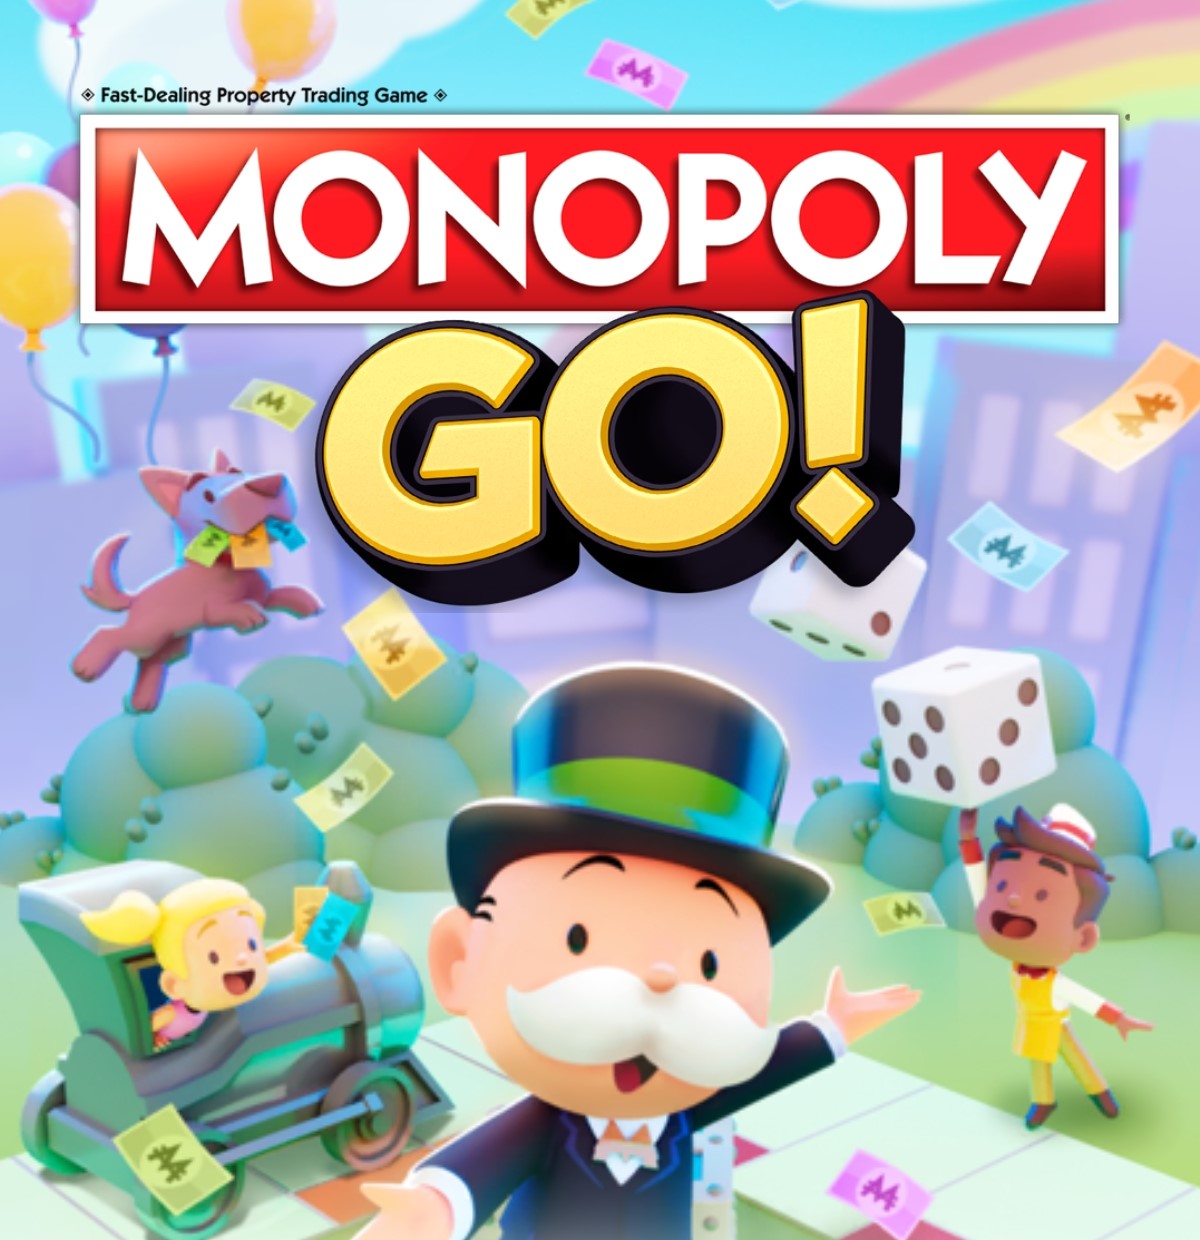 How to Play and Win Tournaments in Monopoly GO!